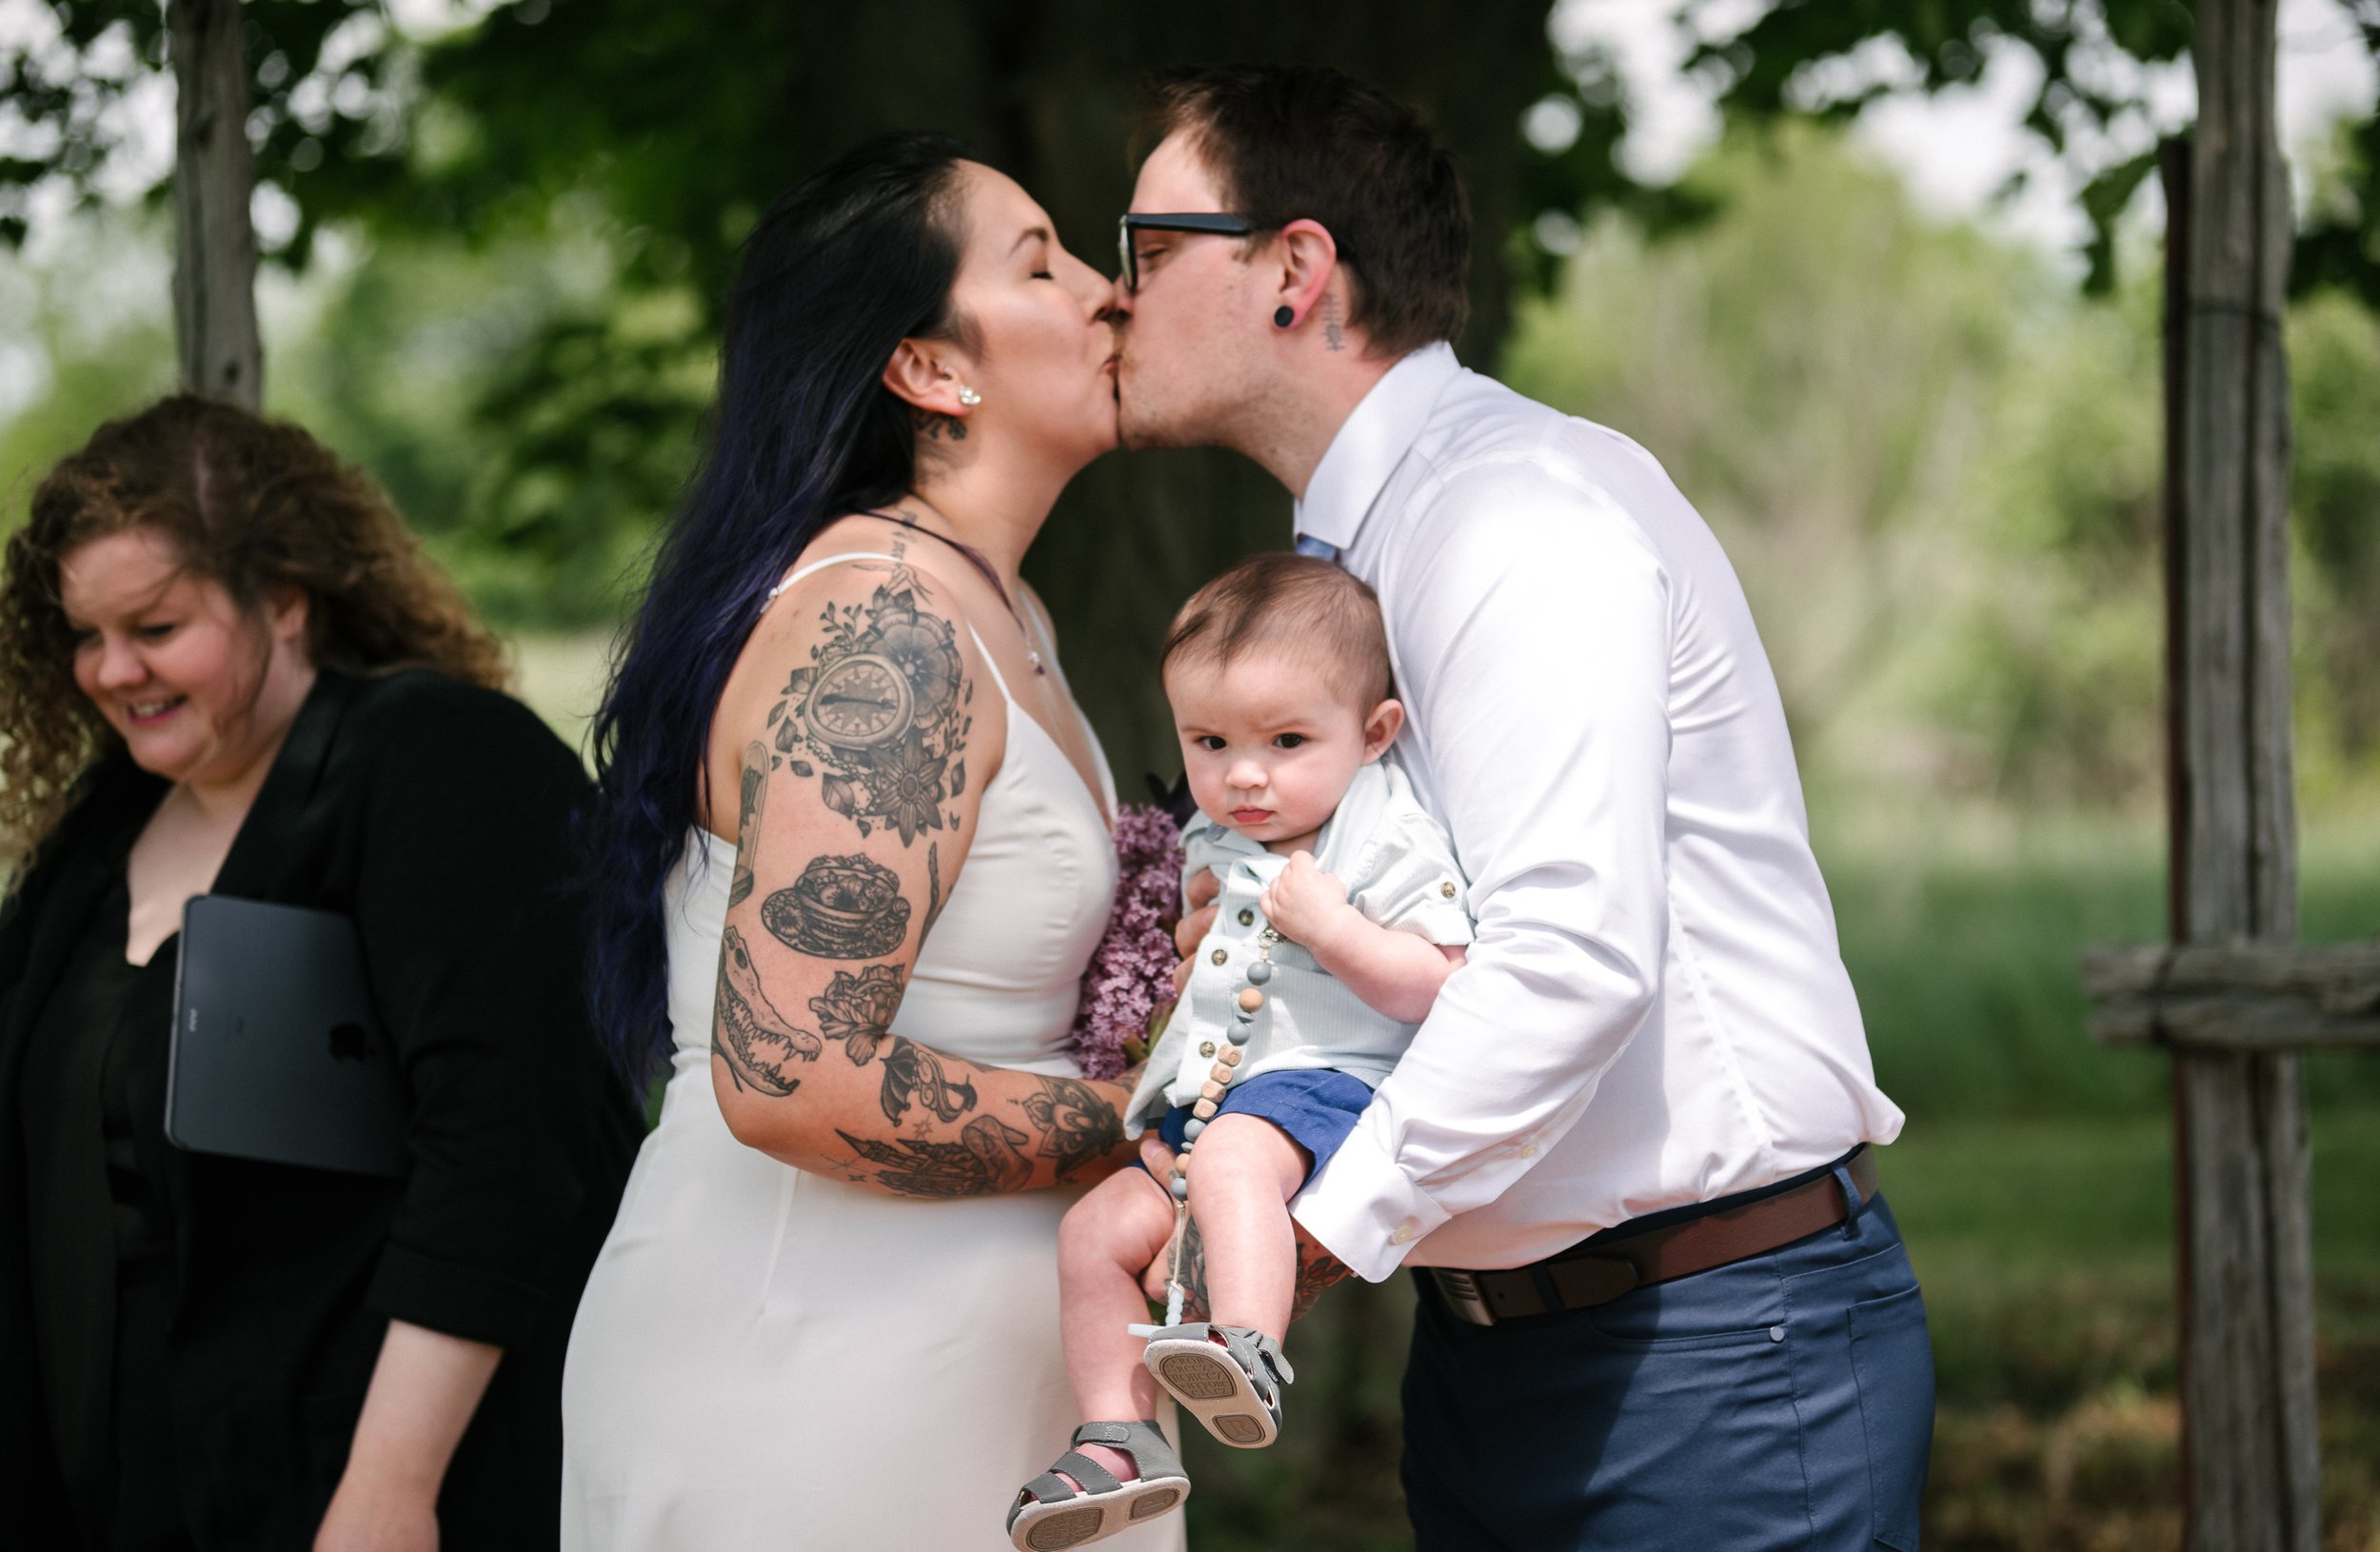 Bride and groom sharing first kiss holding little baby